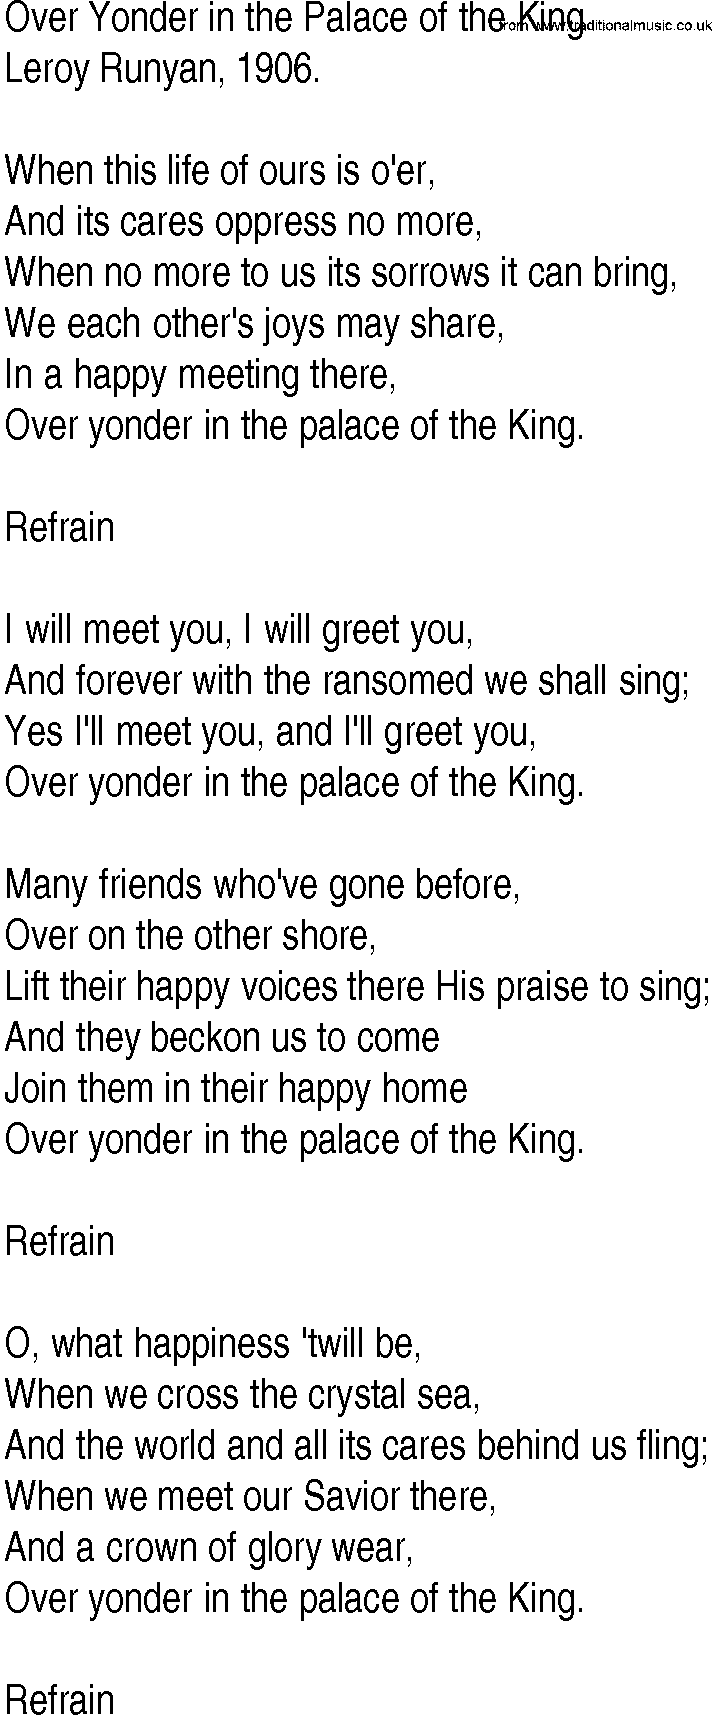 Hymn and Gospel Song: Over Yonder in the Palace of the King by Leroy Runyan lyrics